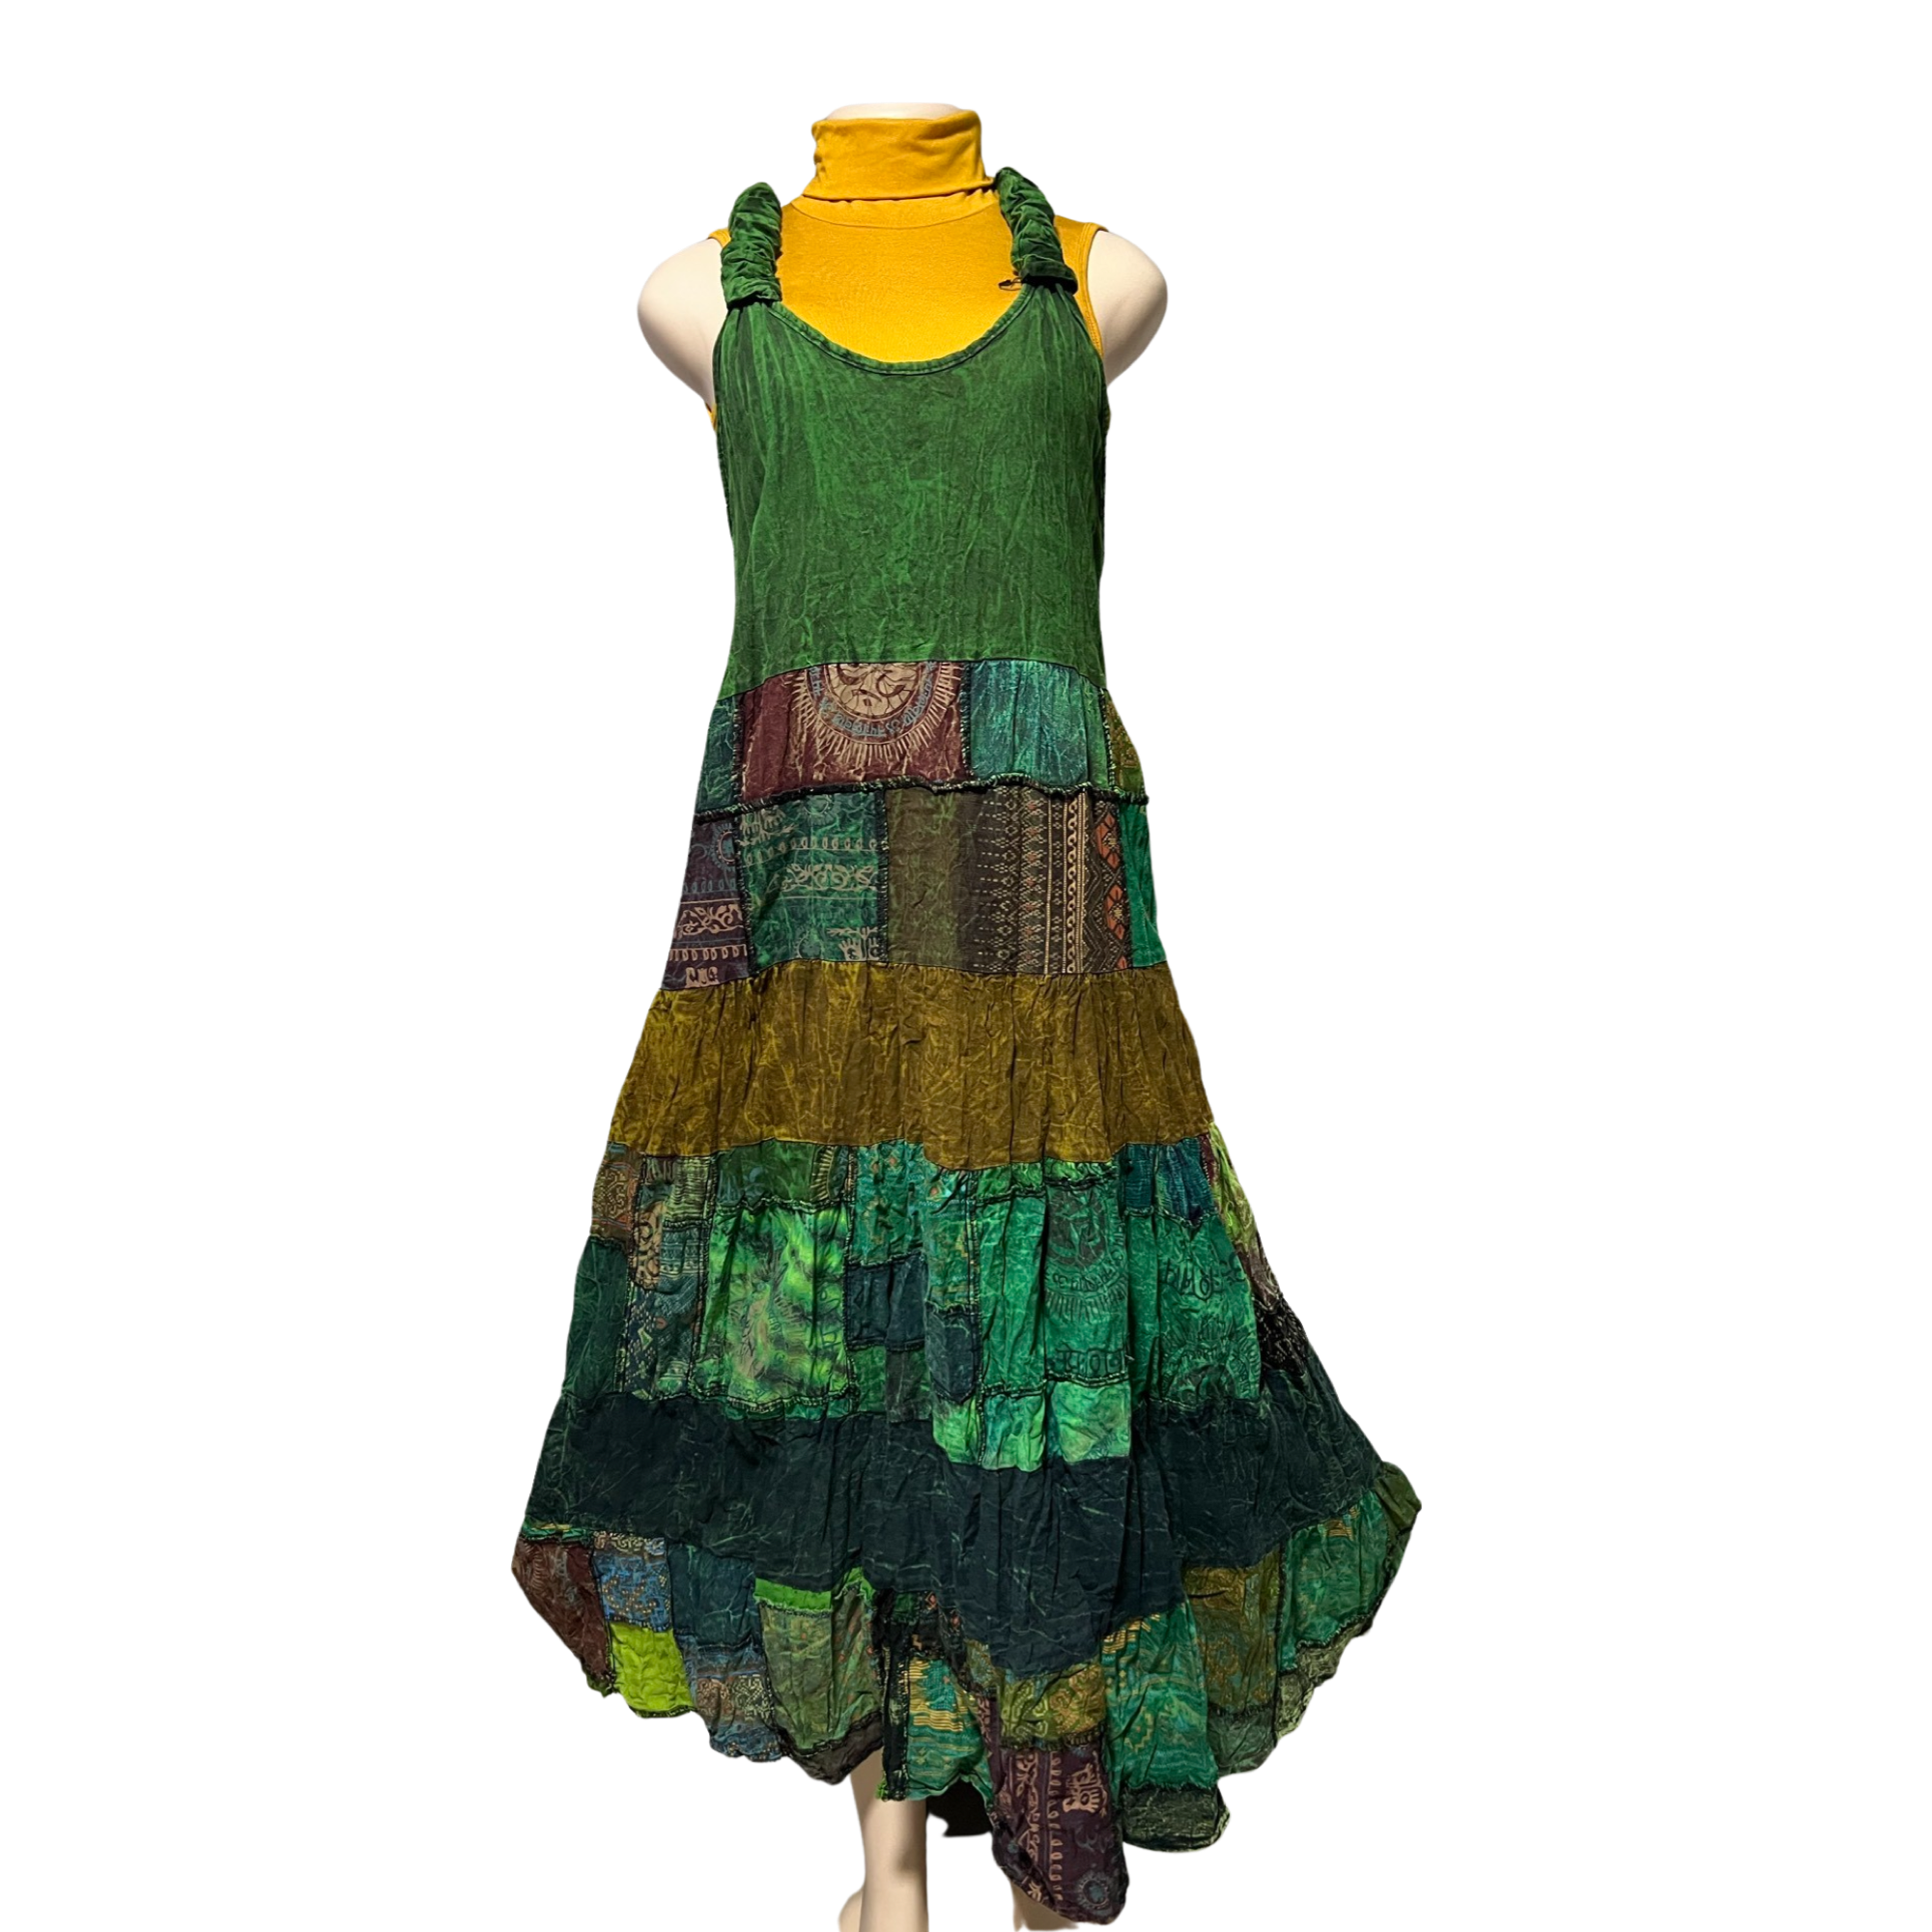 Patchwork Overall Maxi Cotton Dress W/Cross Back.